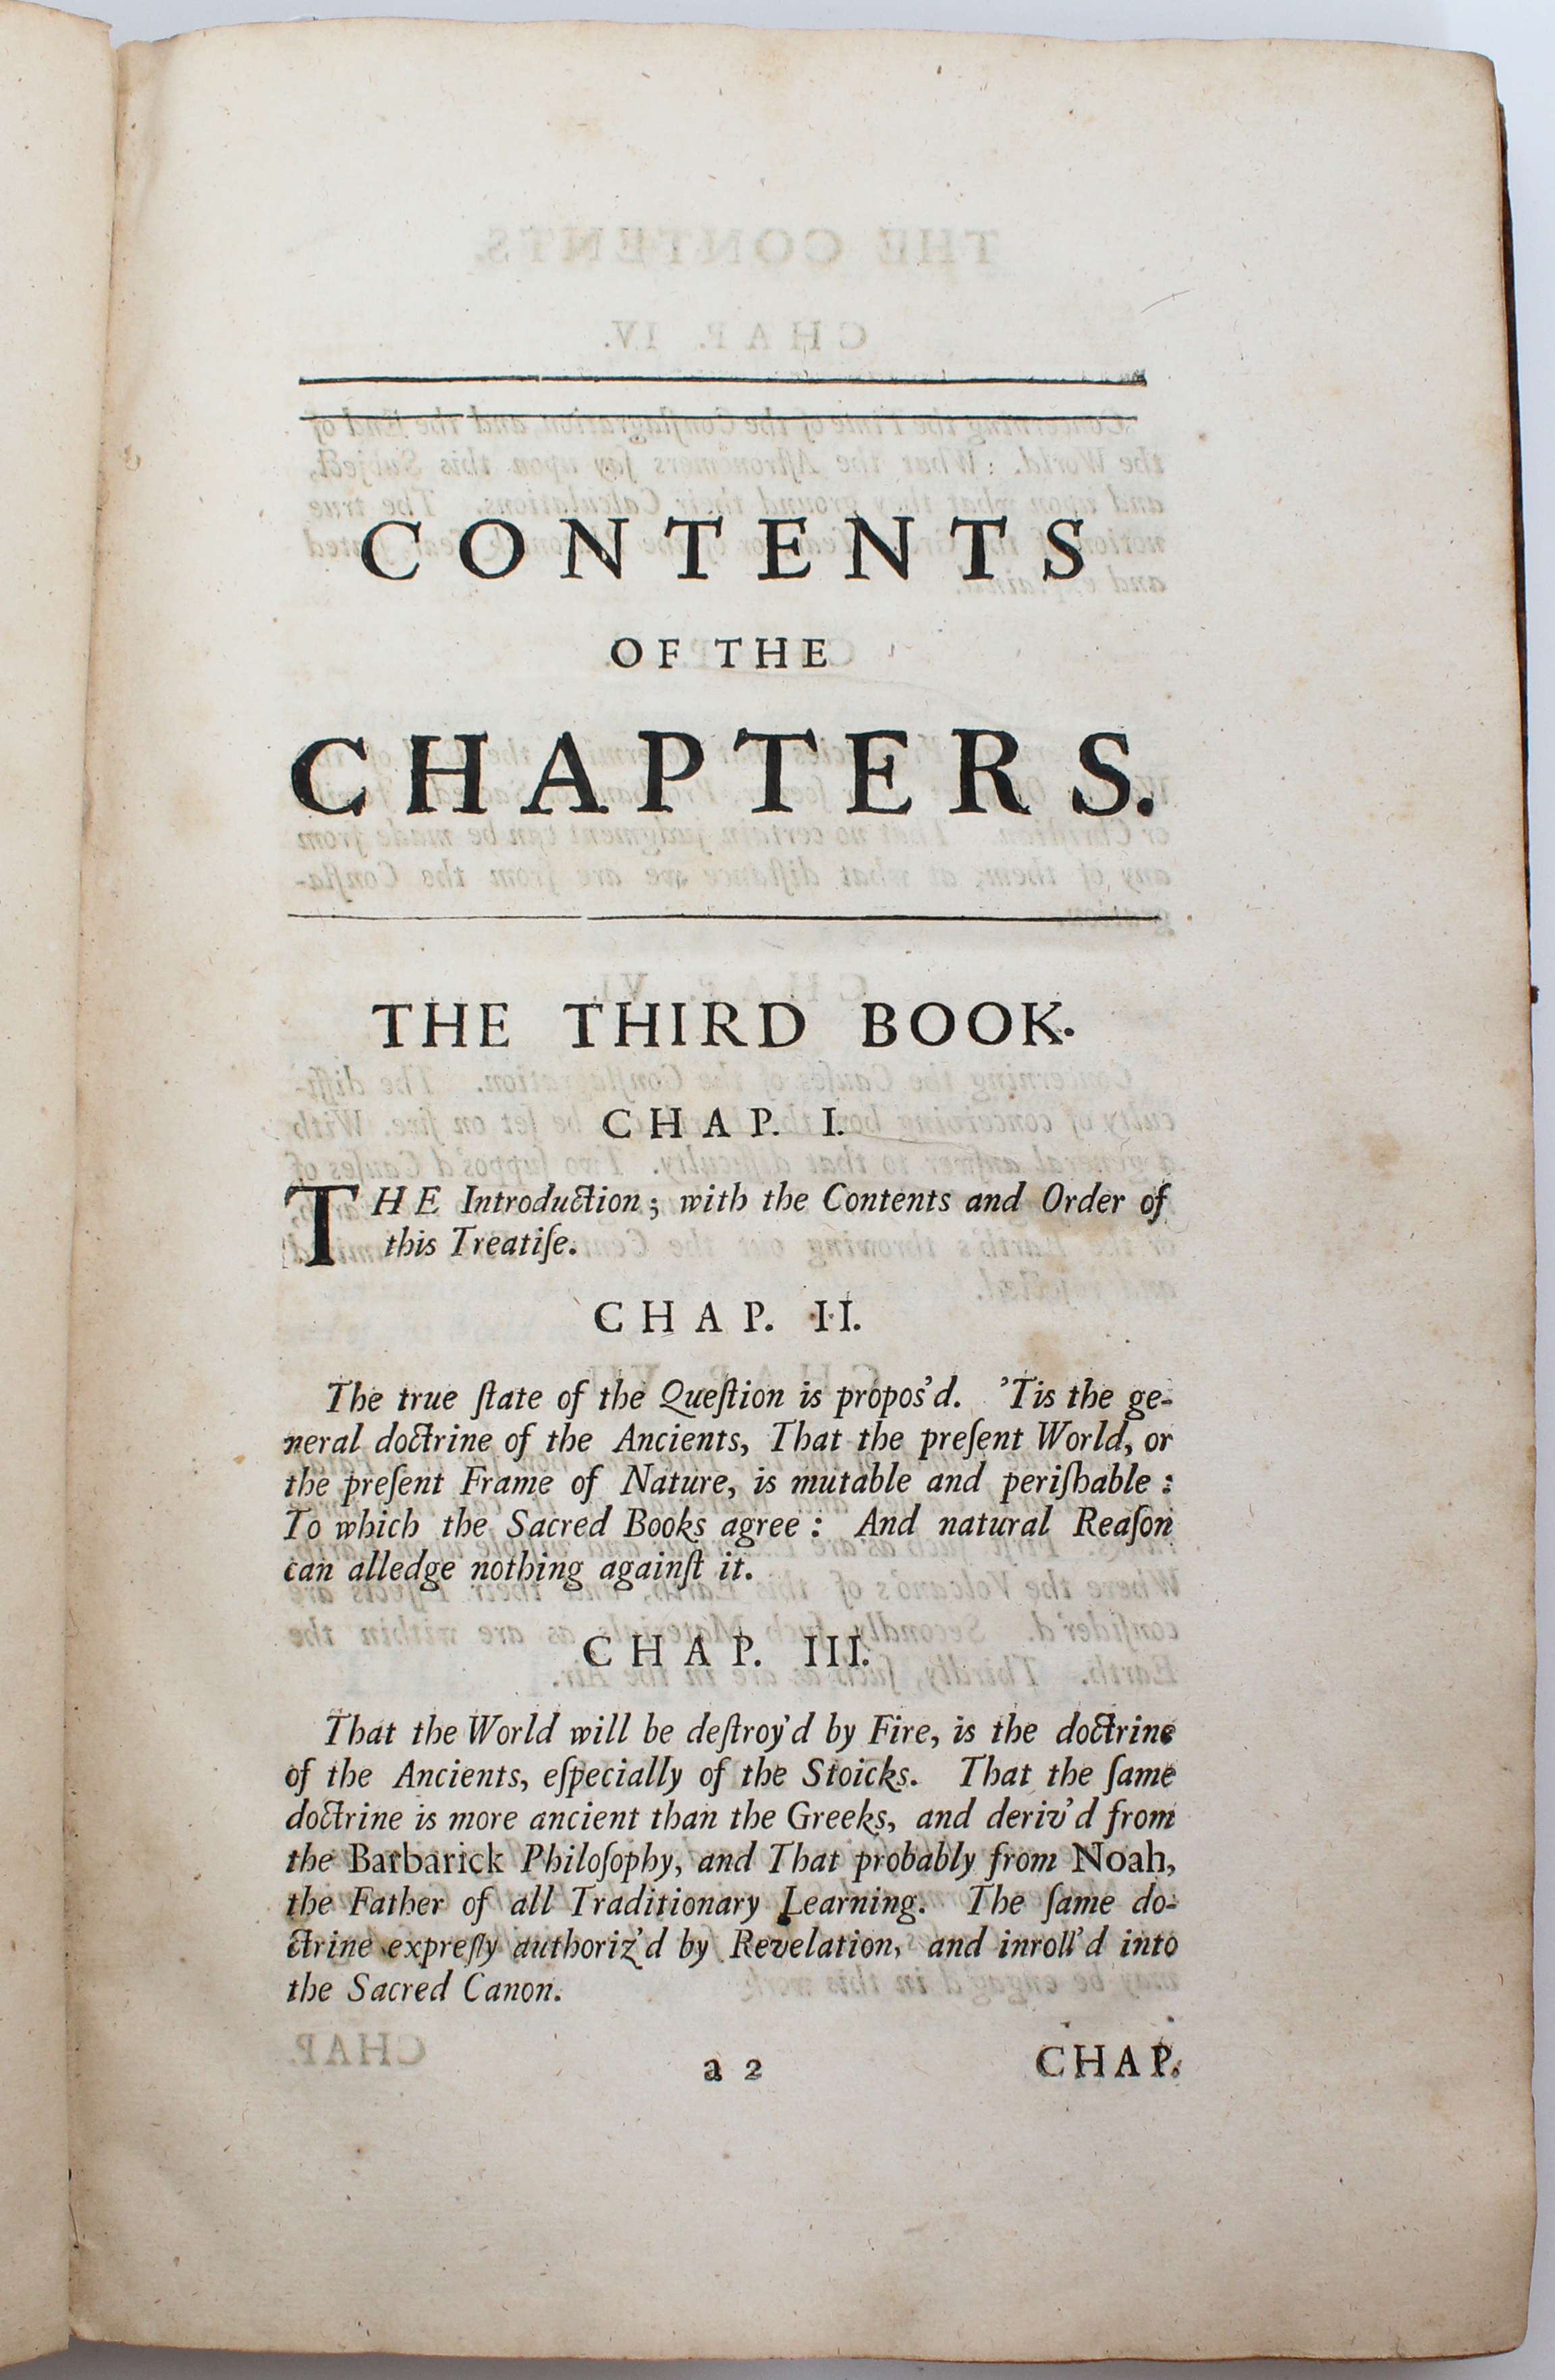 The Theory Of The Earth 1690 - Image 9 of 15